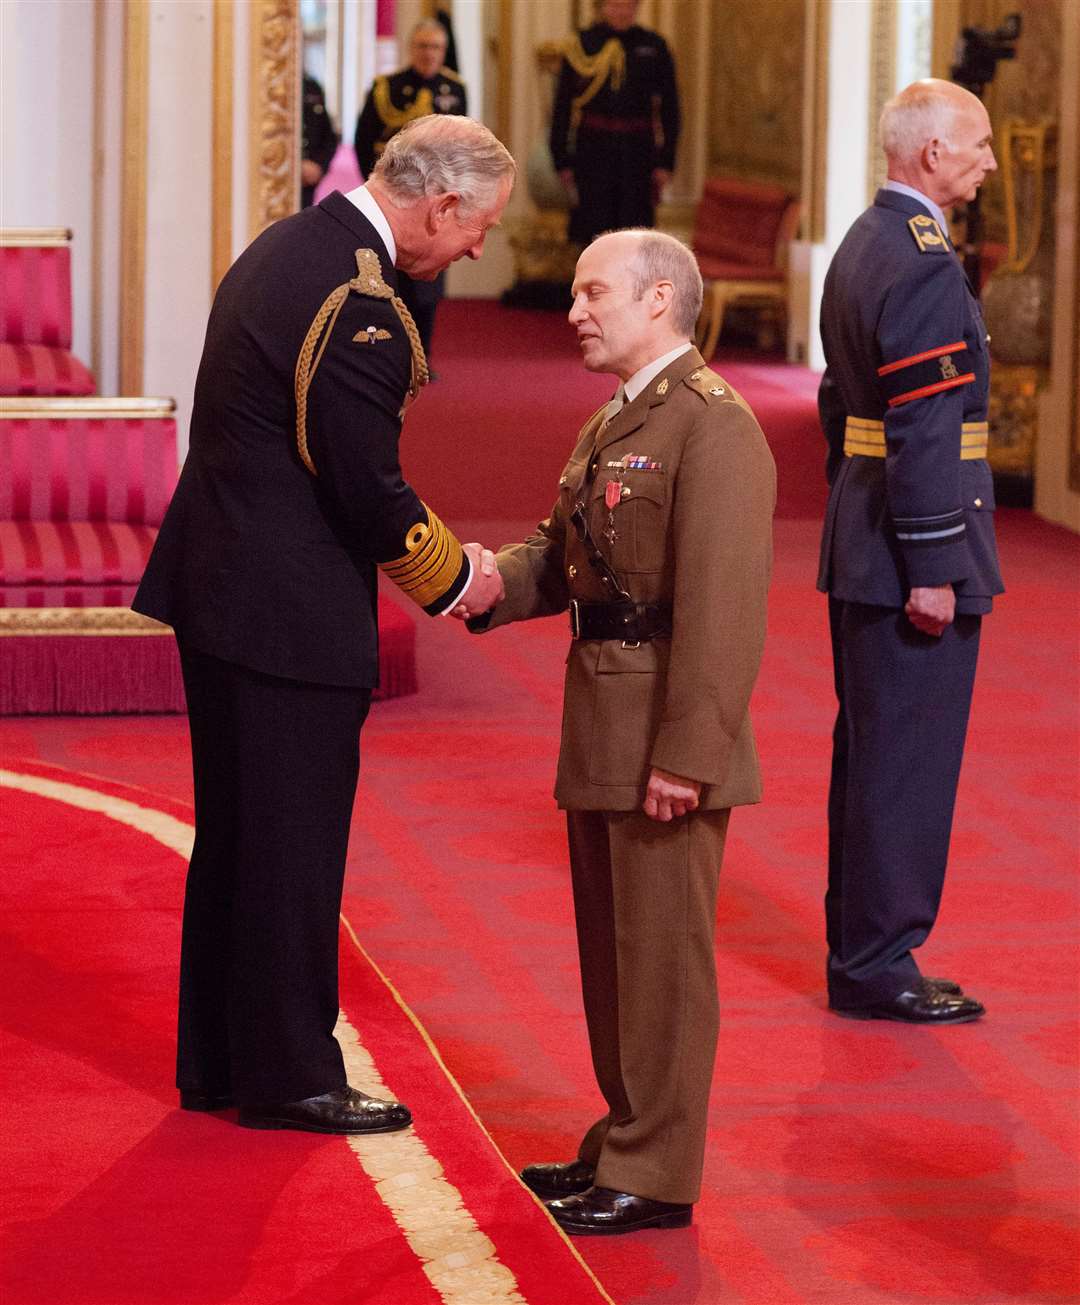 Former medical officer Duane Fletcher, who served in the first Gulf War, received an MBE from the Prince of Wales in 2015 (Yui Mok/PA)